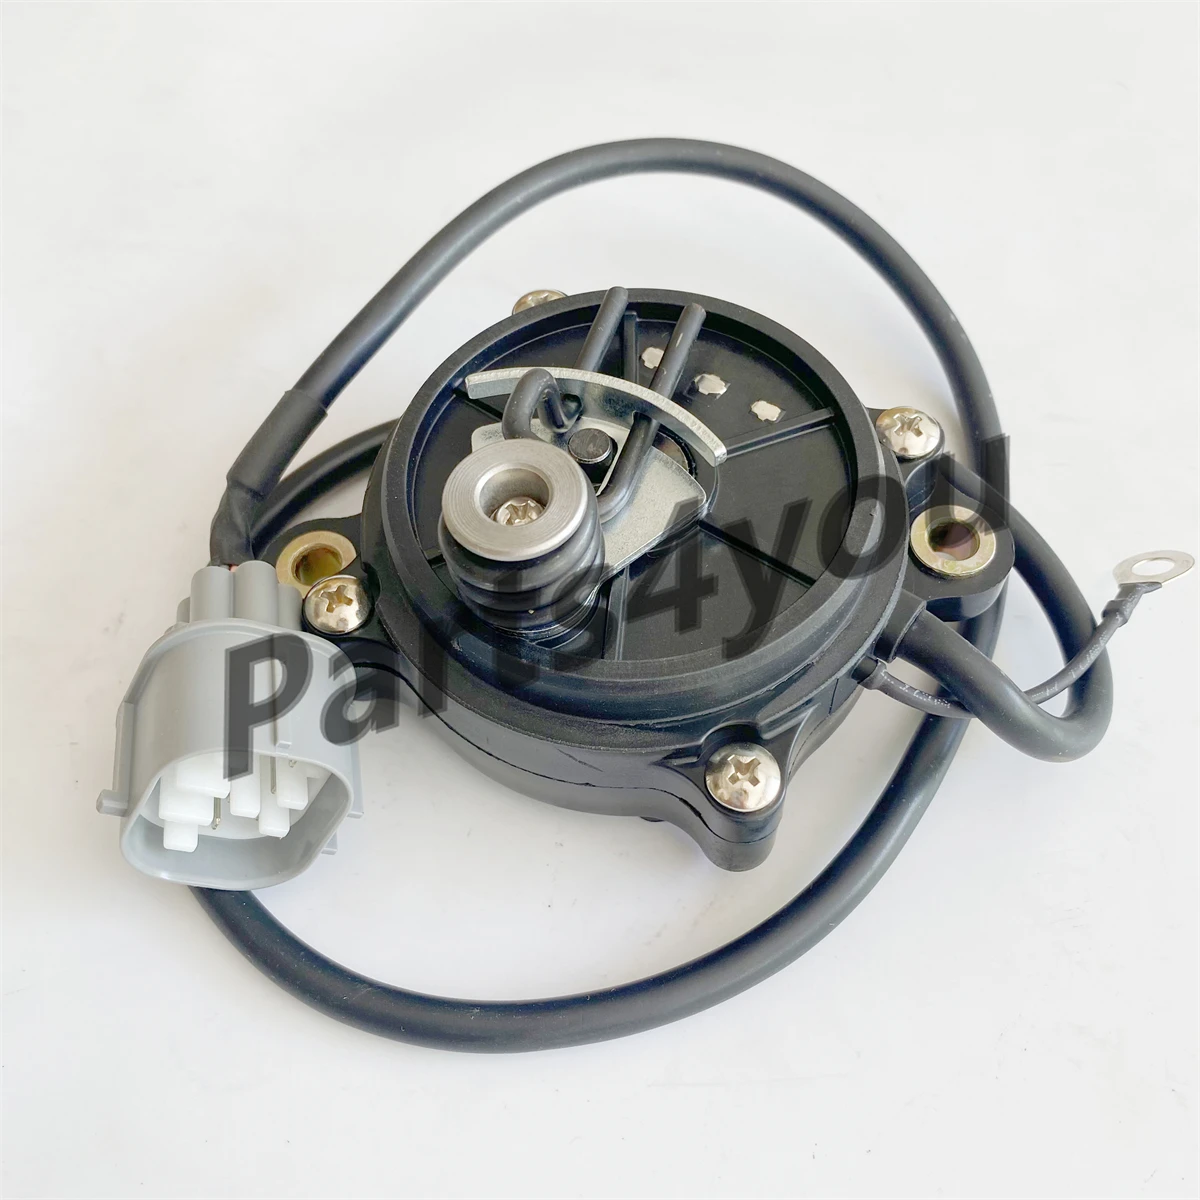 Front Gear Case Motor Assy for CFmoto 400 450 191Q 500S 520 191R 600 Touring 625 800 Trail 800XC 850 950 1000 Q890-314000-10000